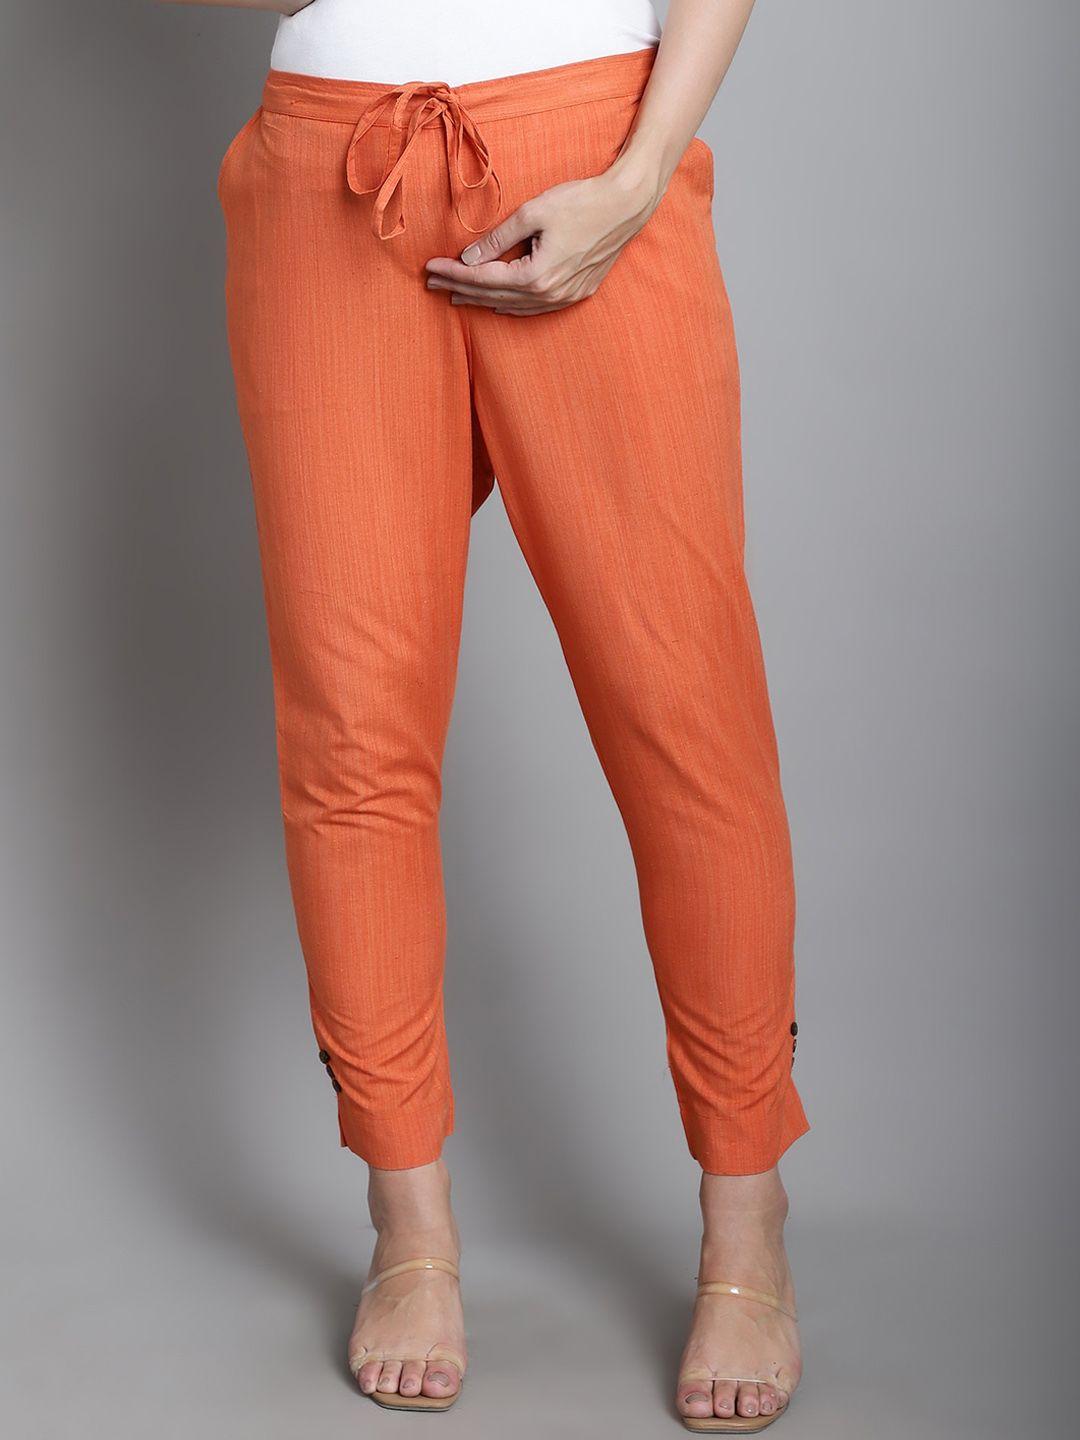 moms-maternity-women-relaxed-straight-leg-mid-rise-cotton-maternity-trousers